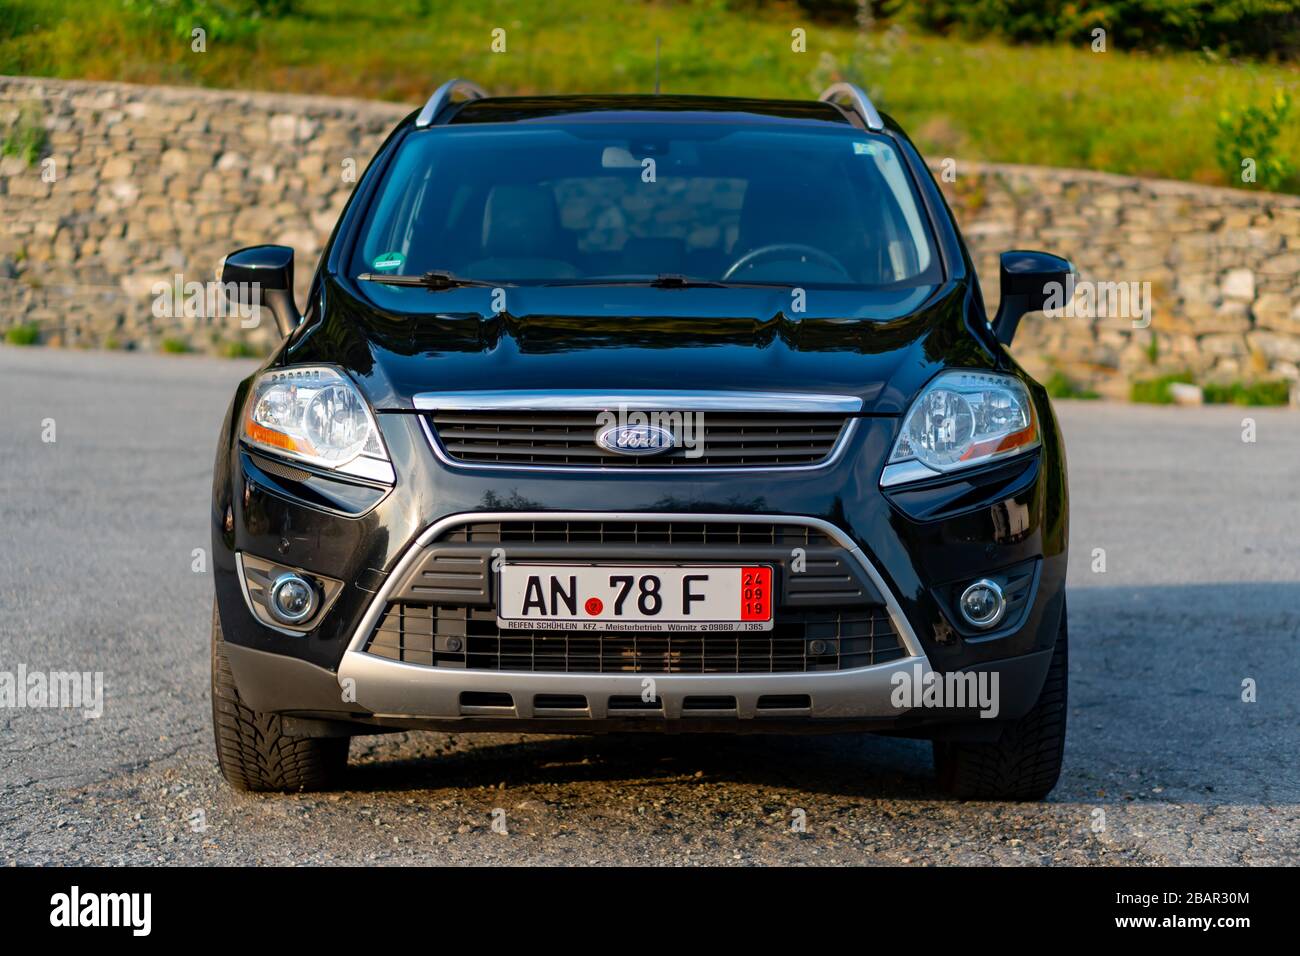 Second generation Ford Kuga SUV, black metallic color, panoramic ceiling, 4x4 traction, automatic transmission, isolated in an empty parking lot, Stock Photo